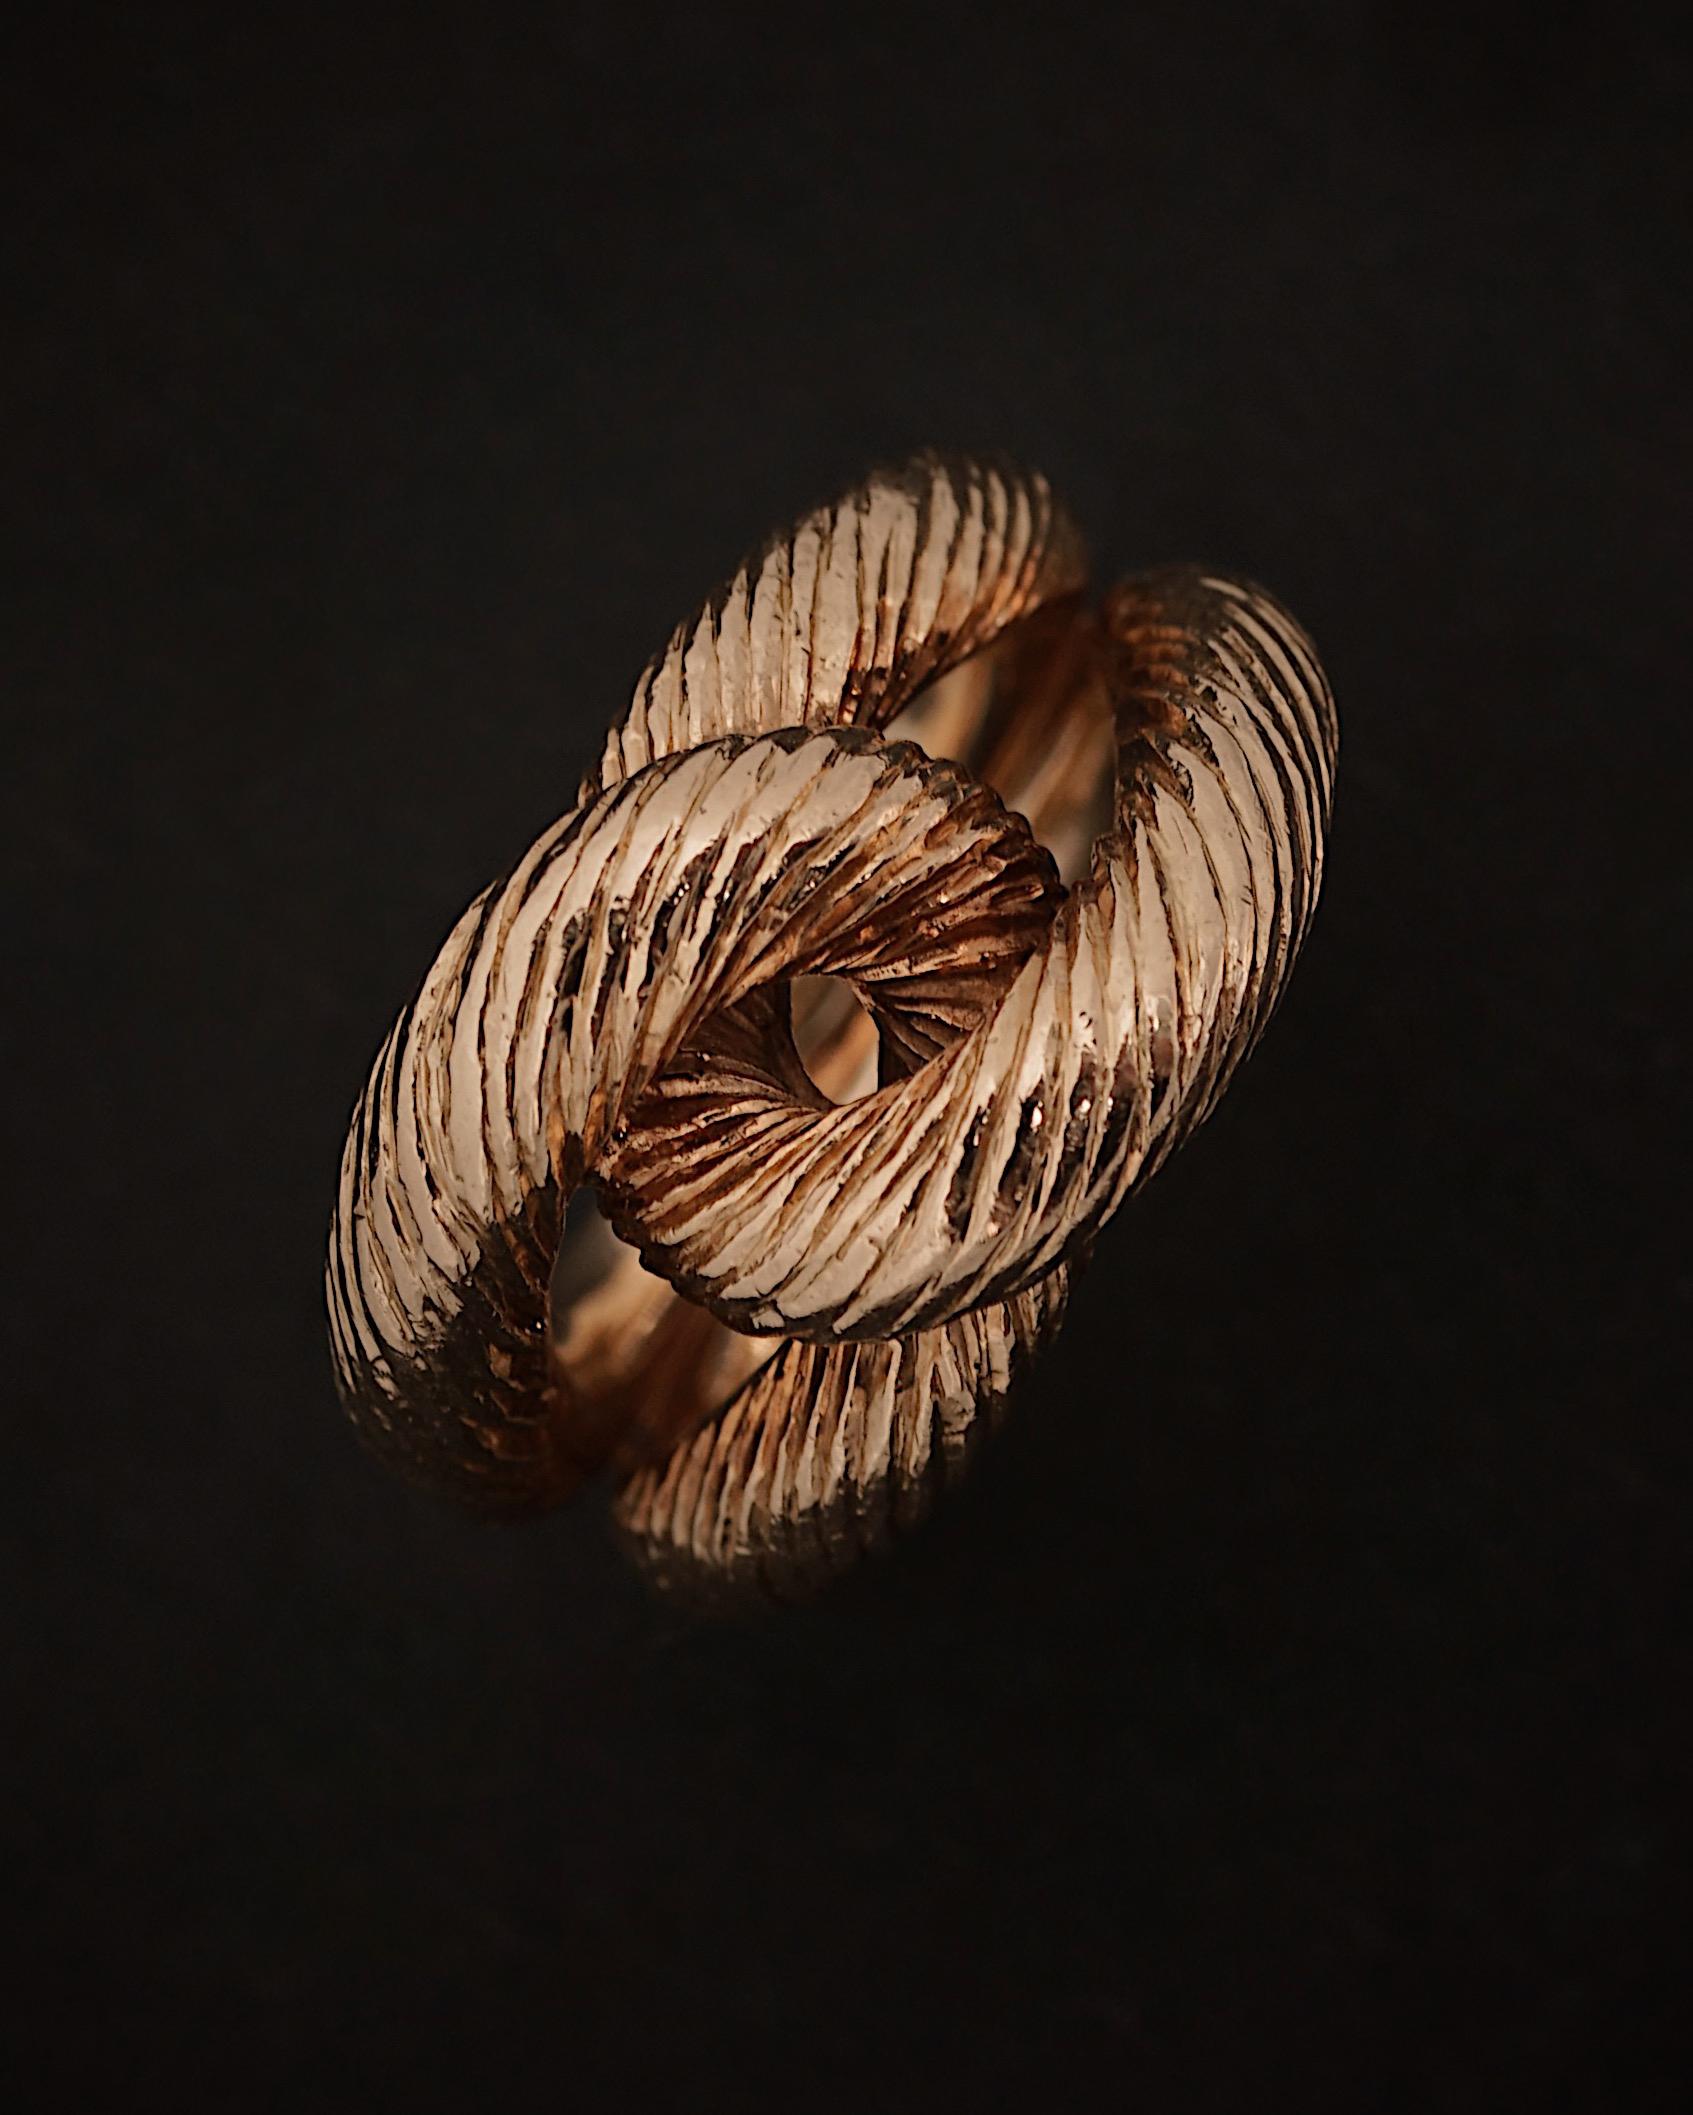 cartier knot ring